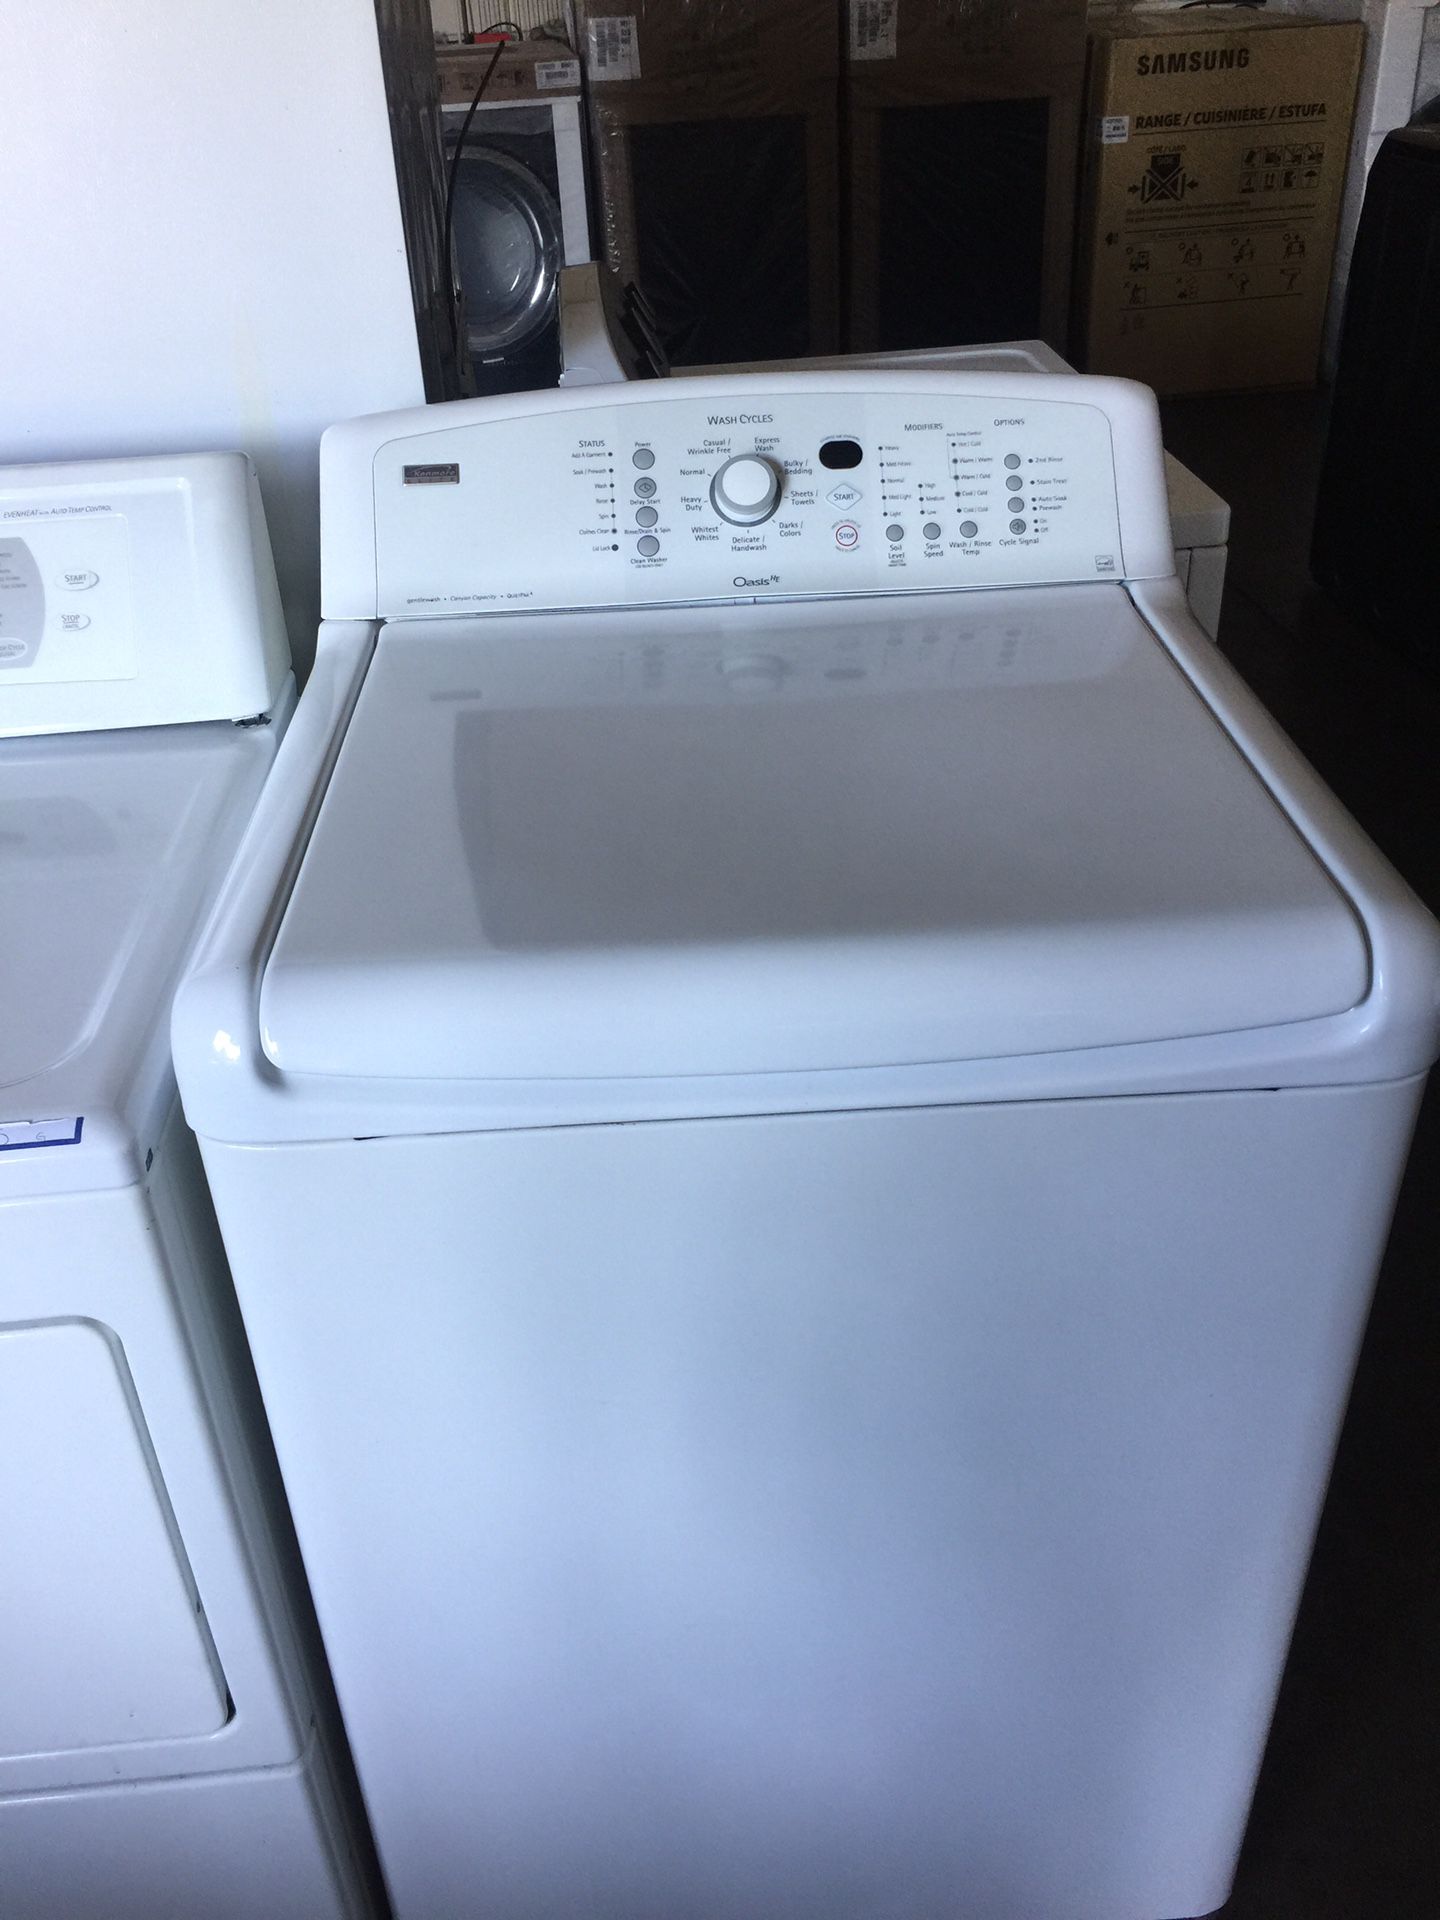 Kenmore washer and gas dryer set